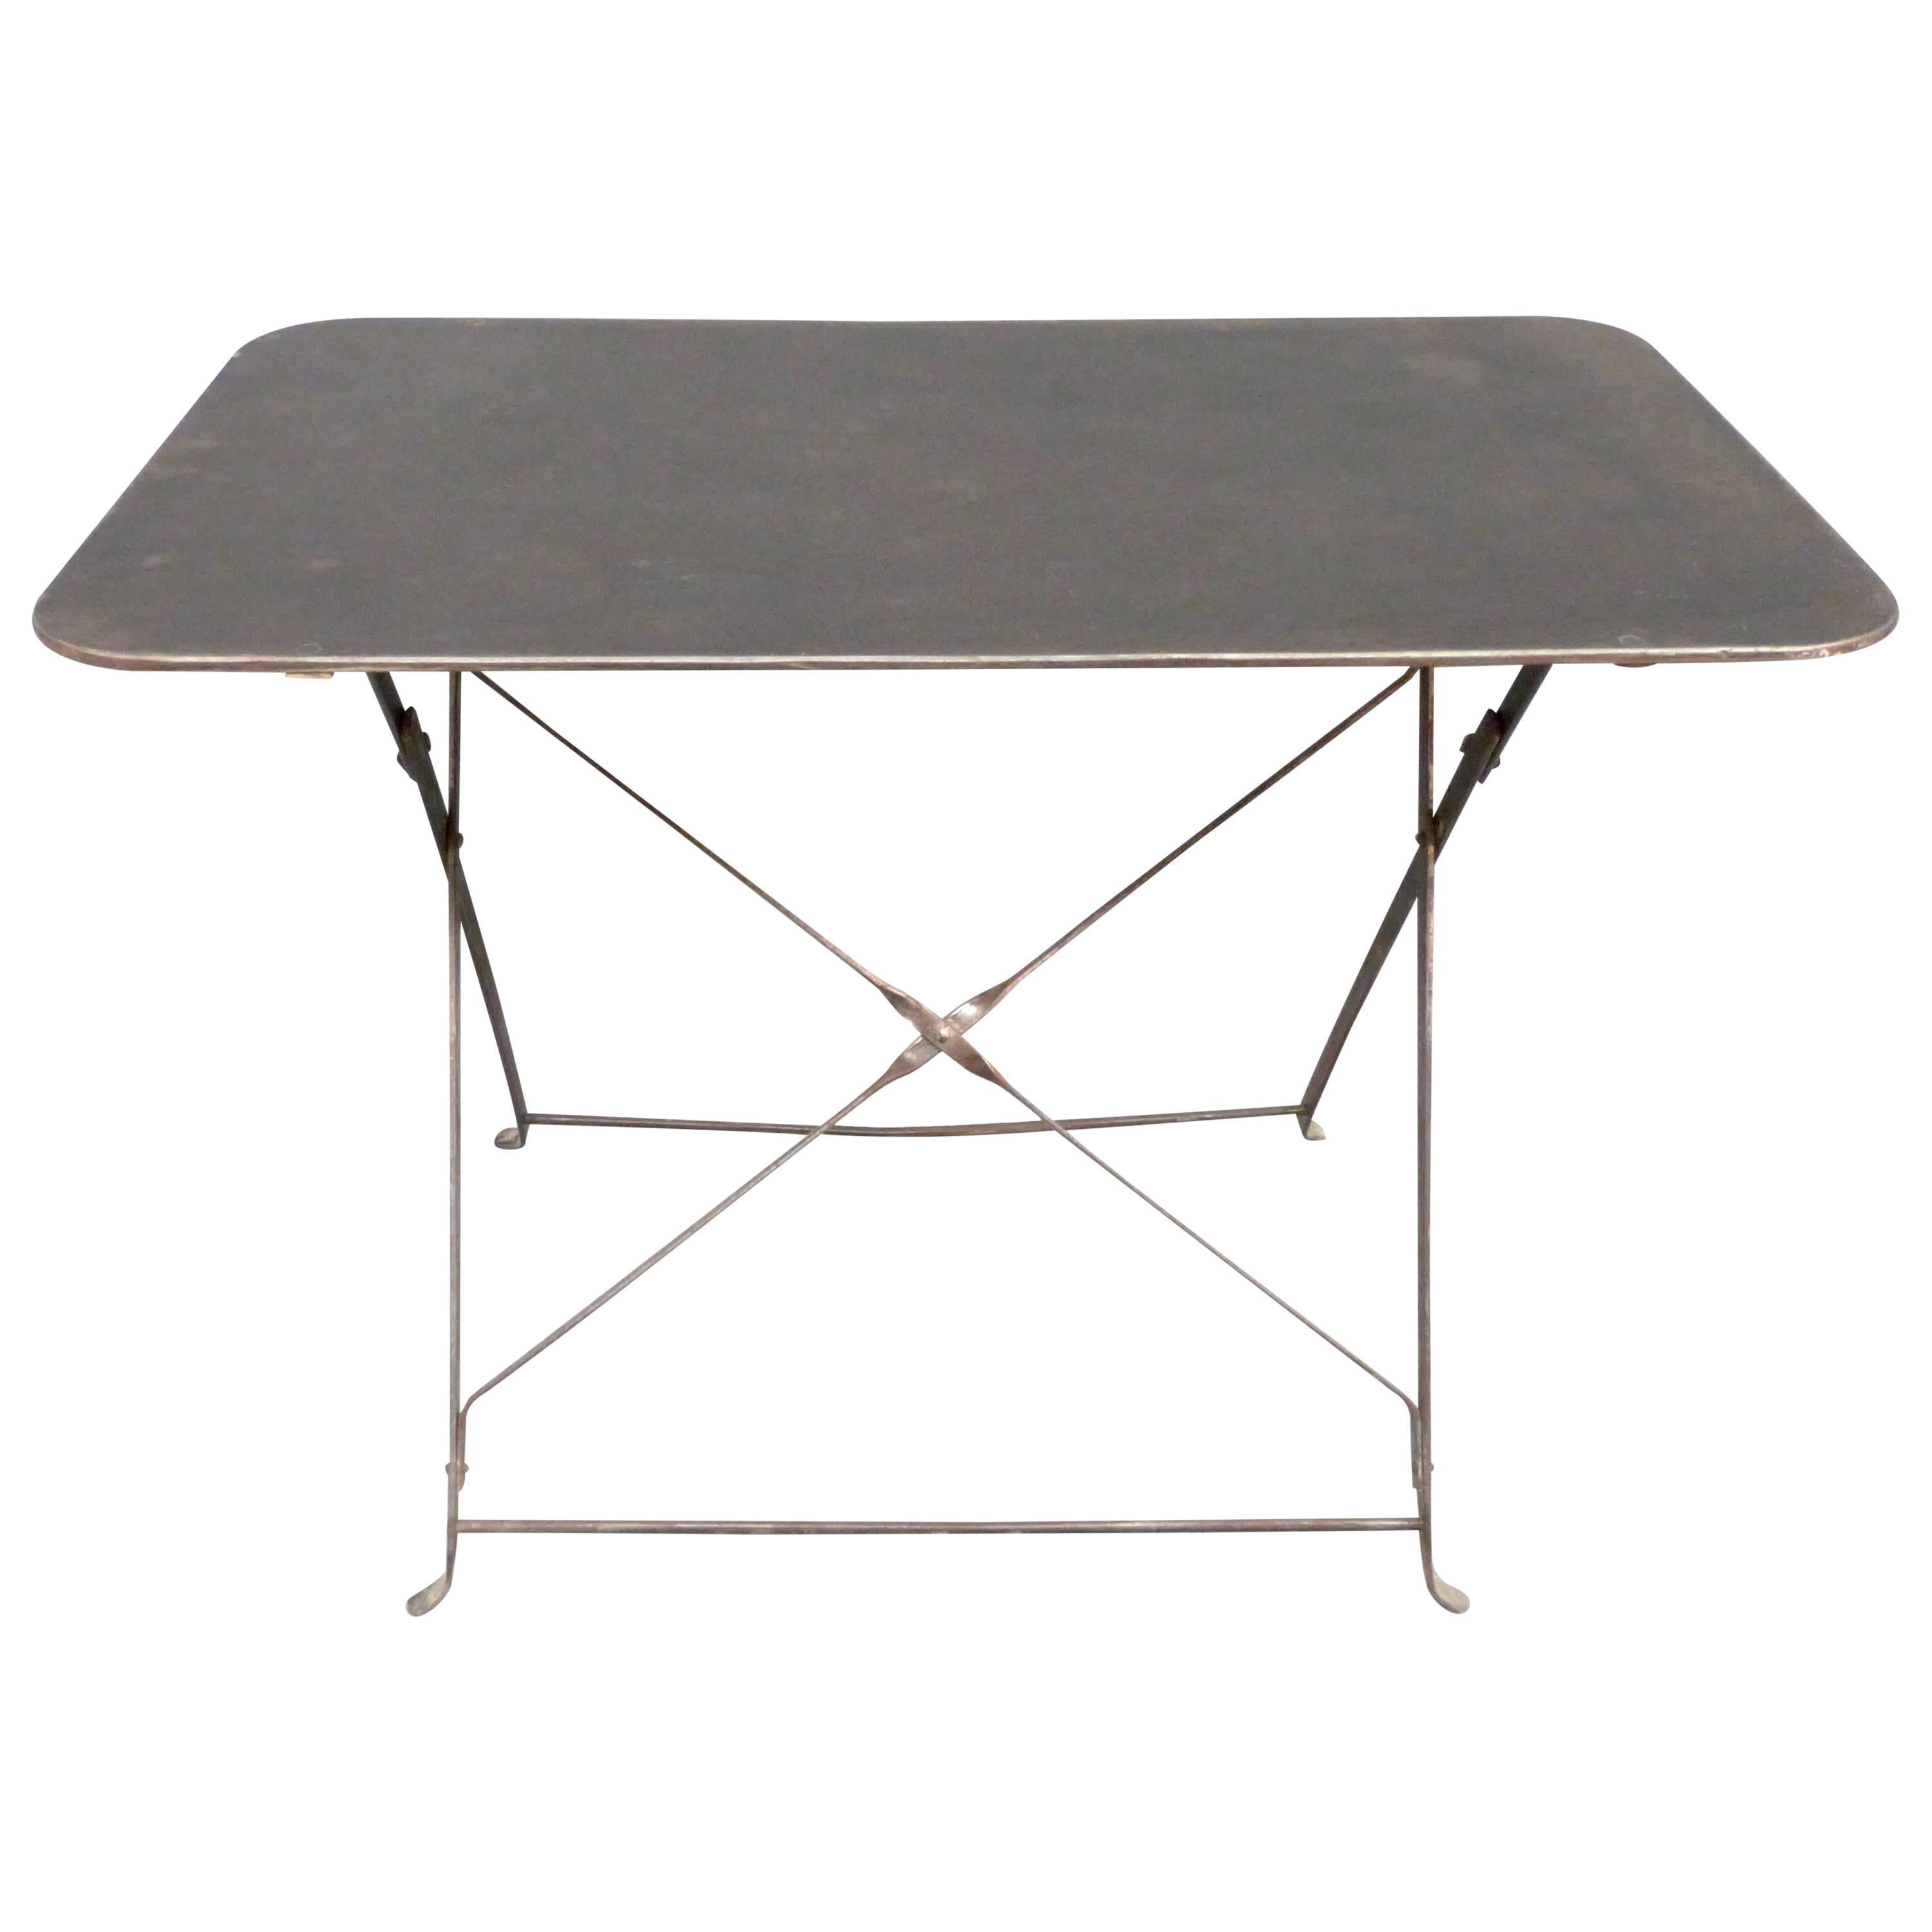 French Steel Industrial Style Side Table For Sale